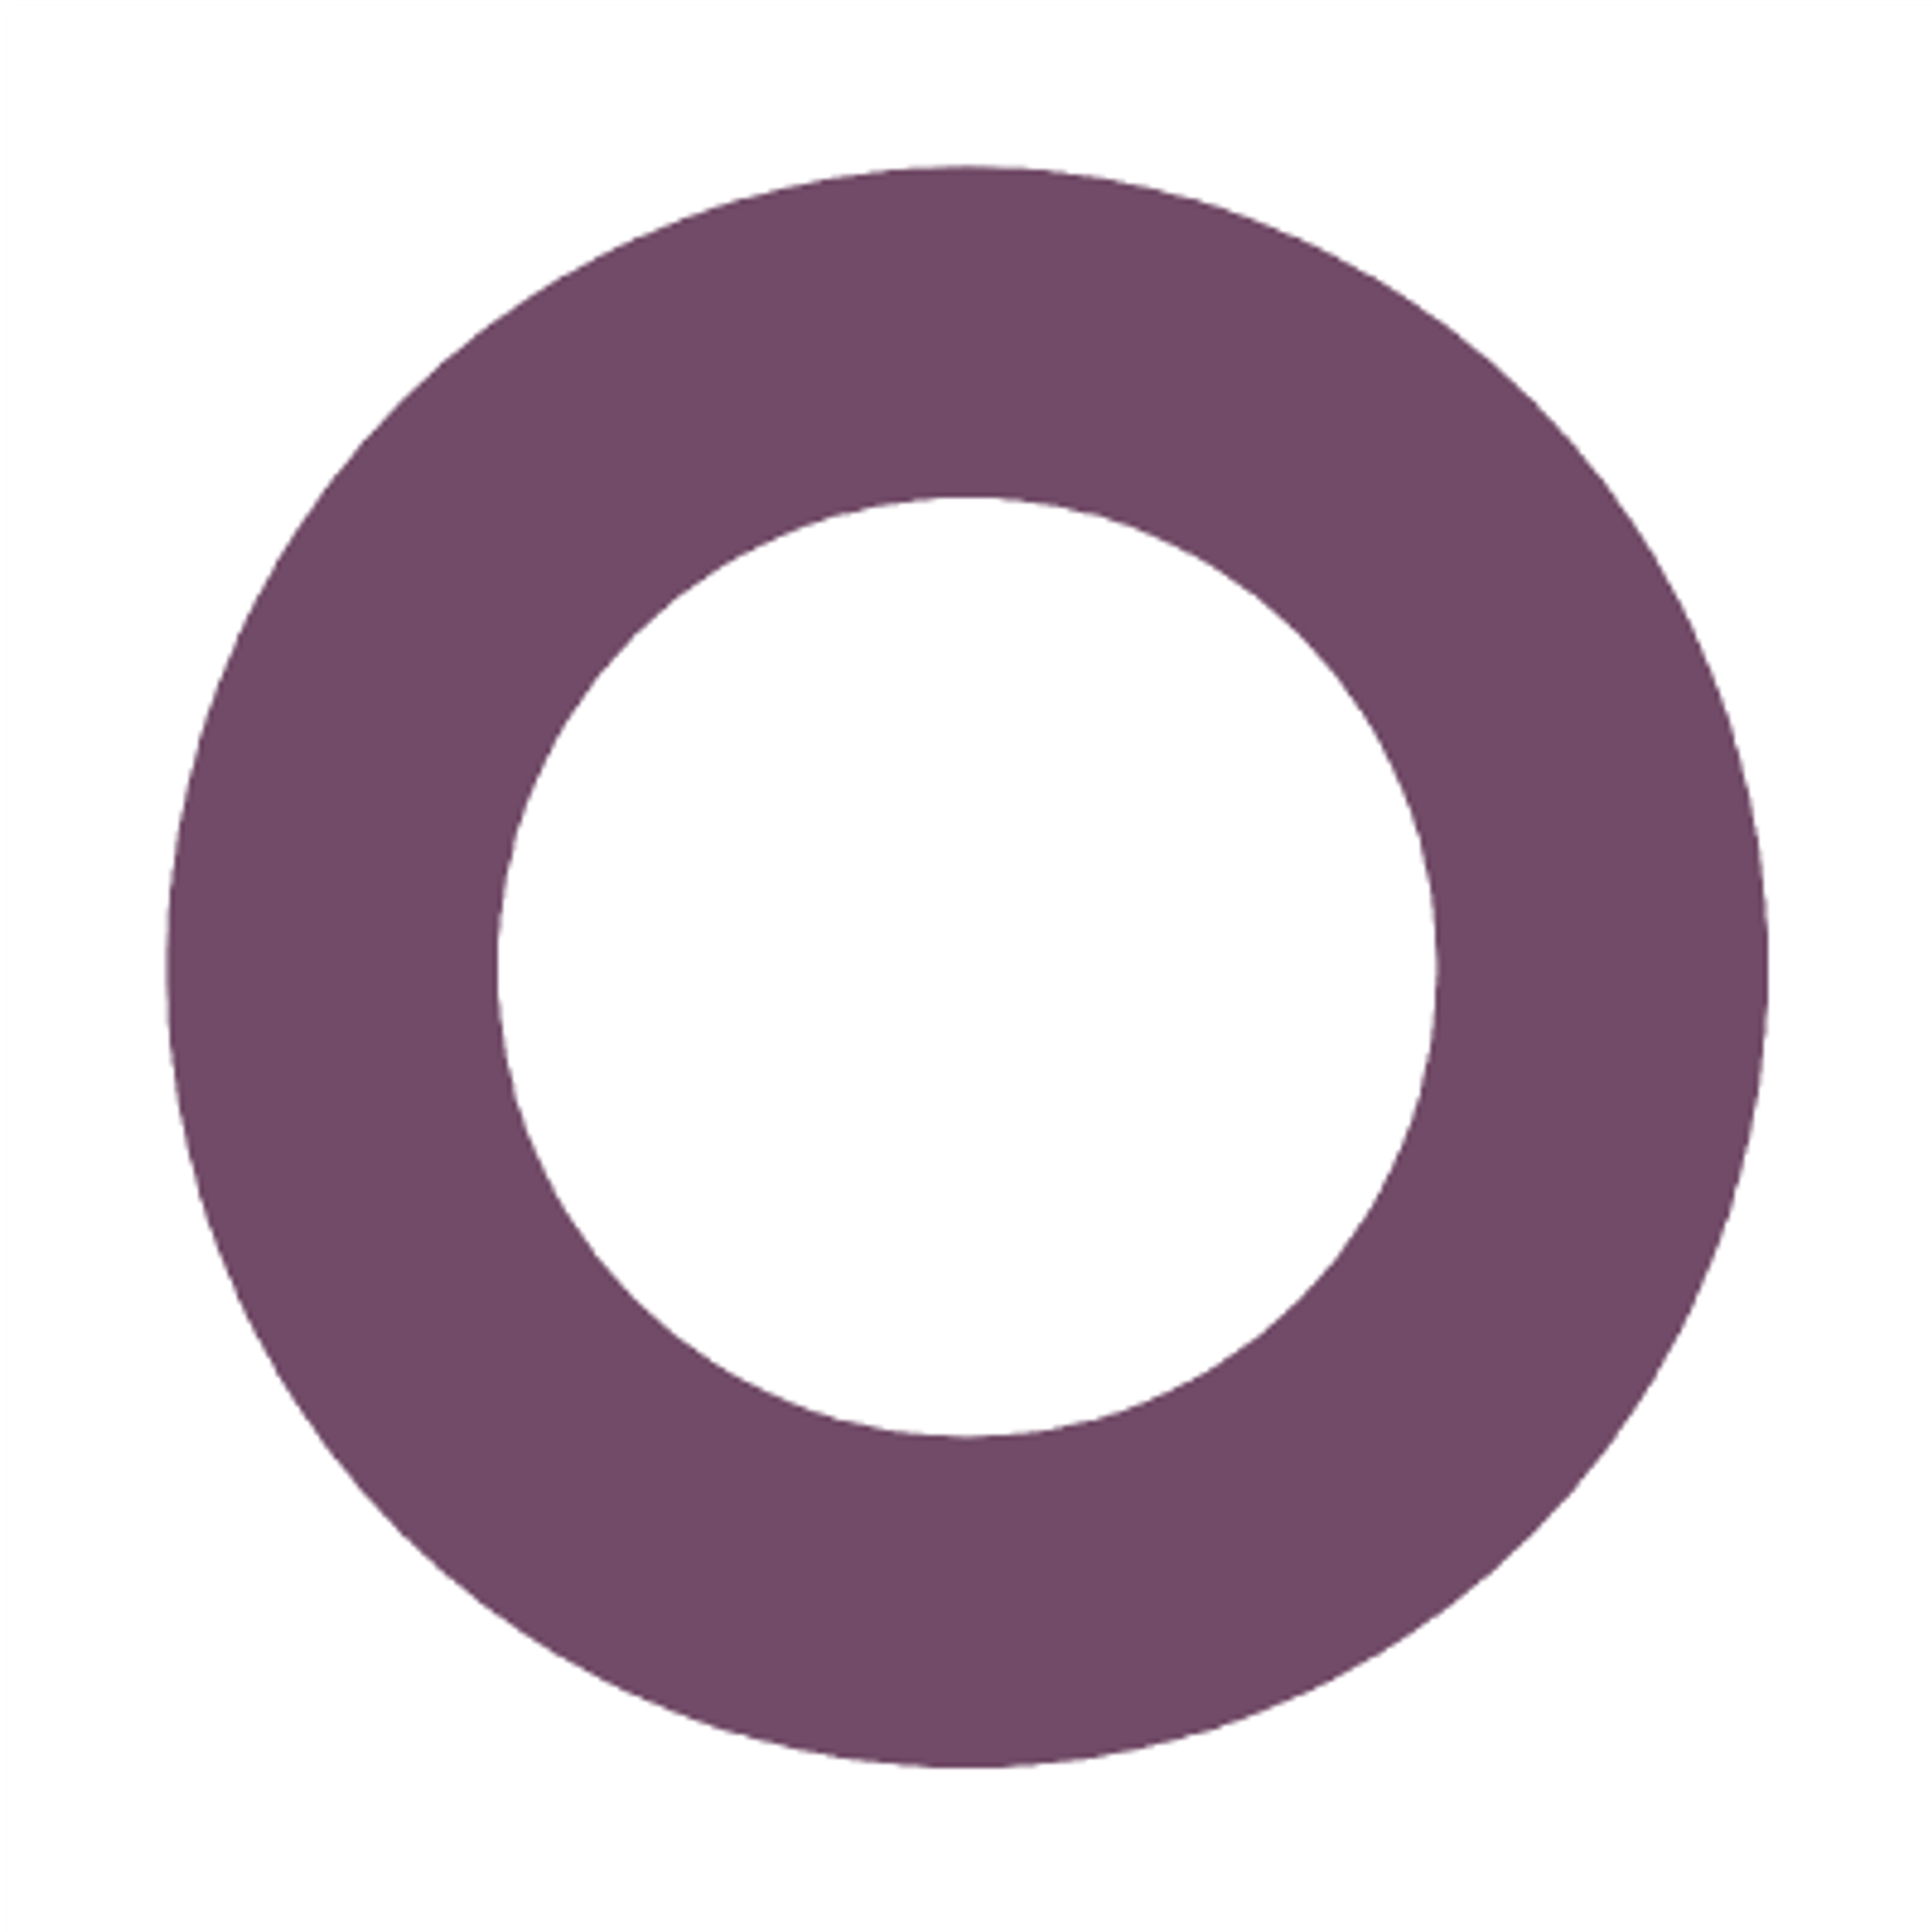 [IMP] core: auto_join now uses LEFT JOIN by rco-odoo · Pull Request #49999 · odoo/odoo